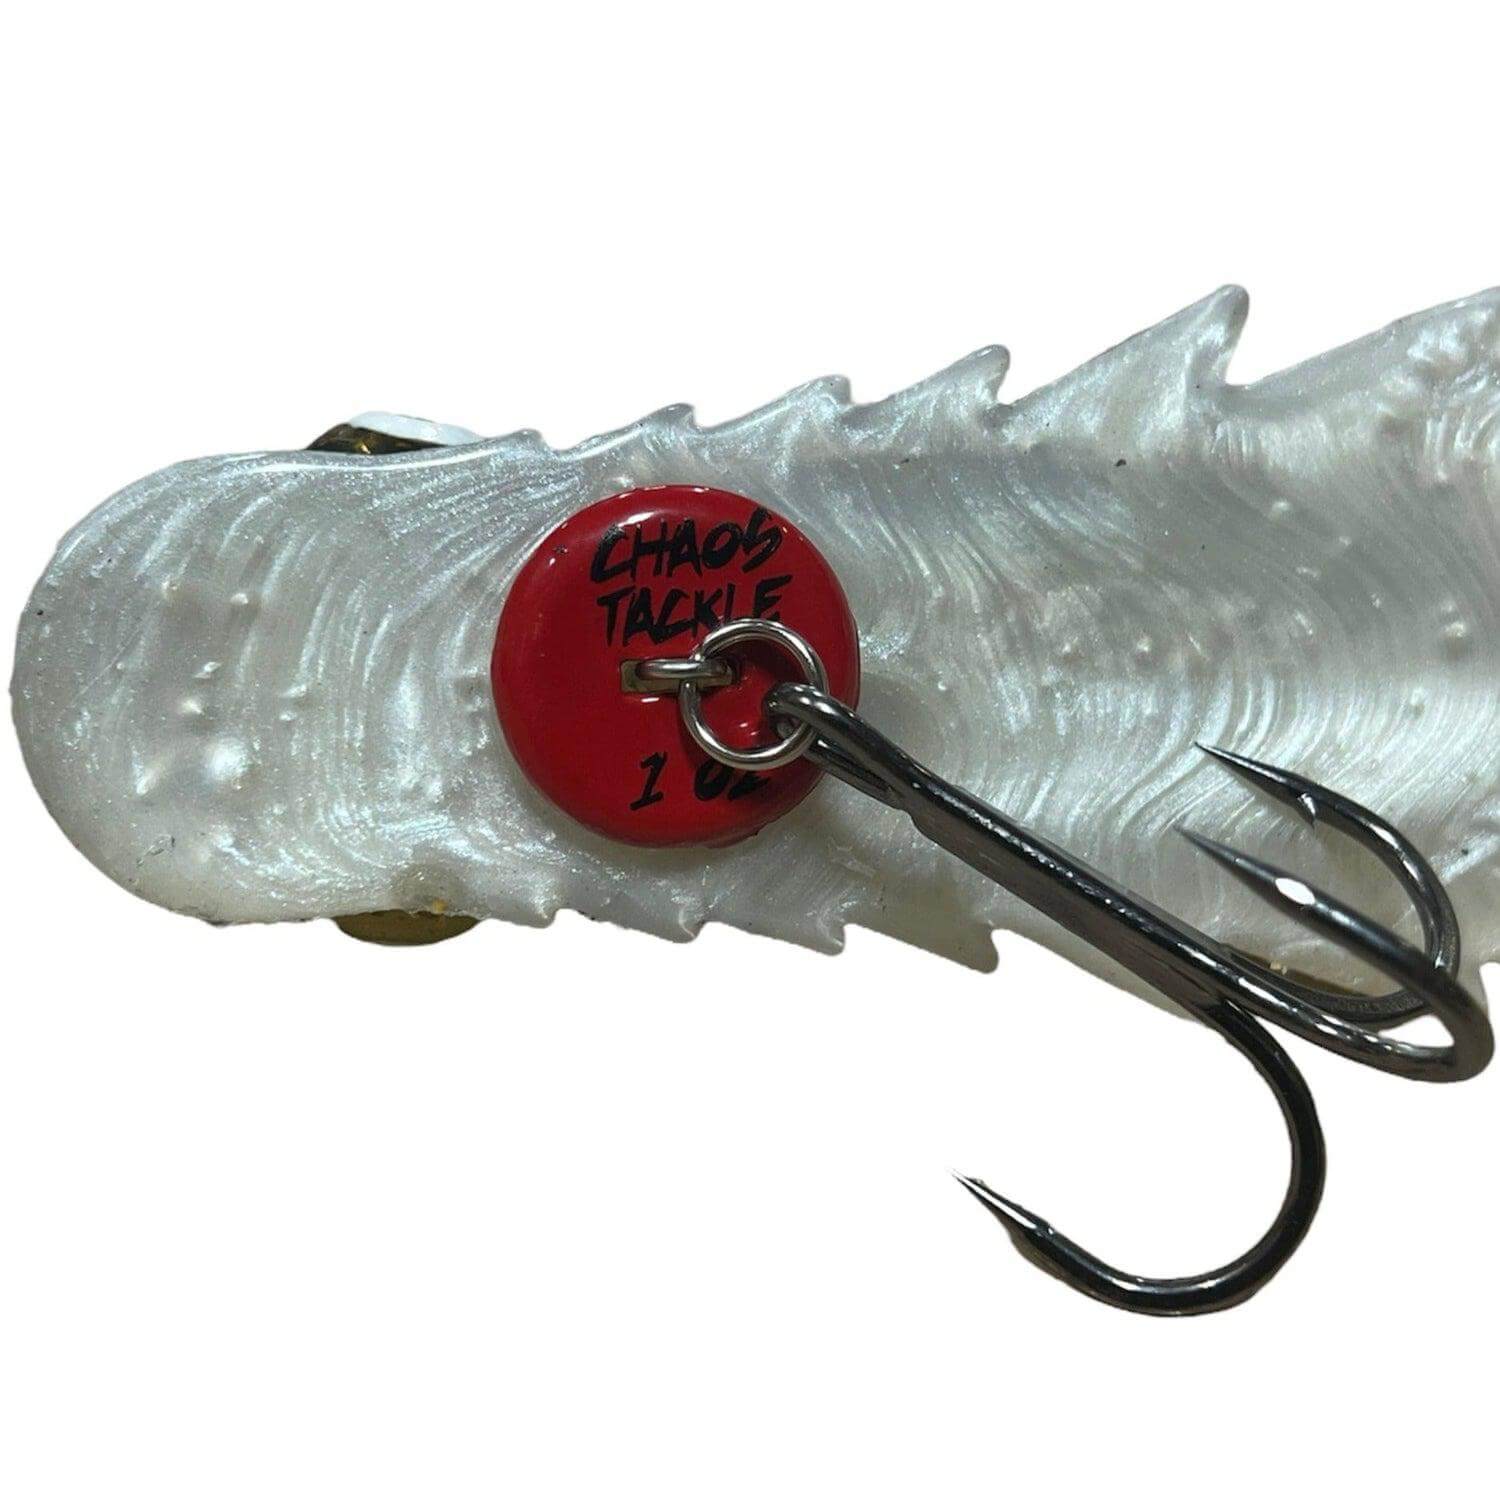 Chaos Tackle Deep Threat Weights (2pk) | fishing weight 0.5 oz / White